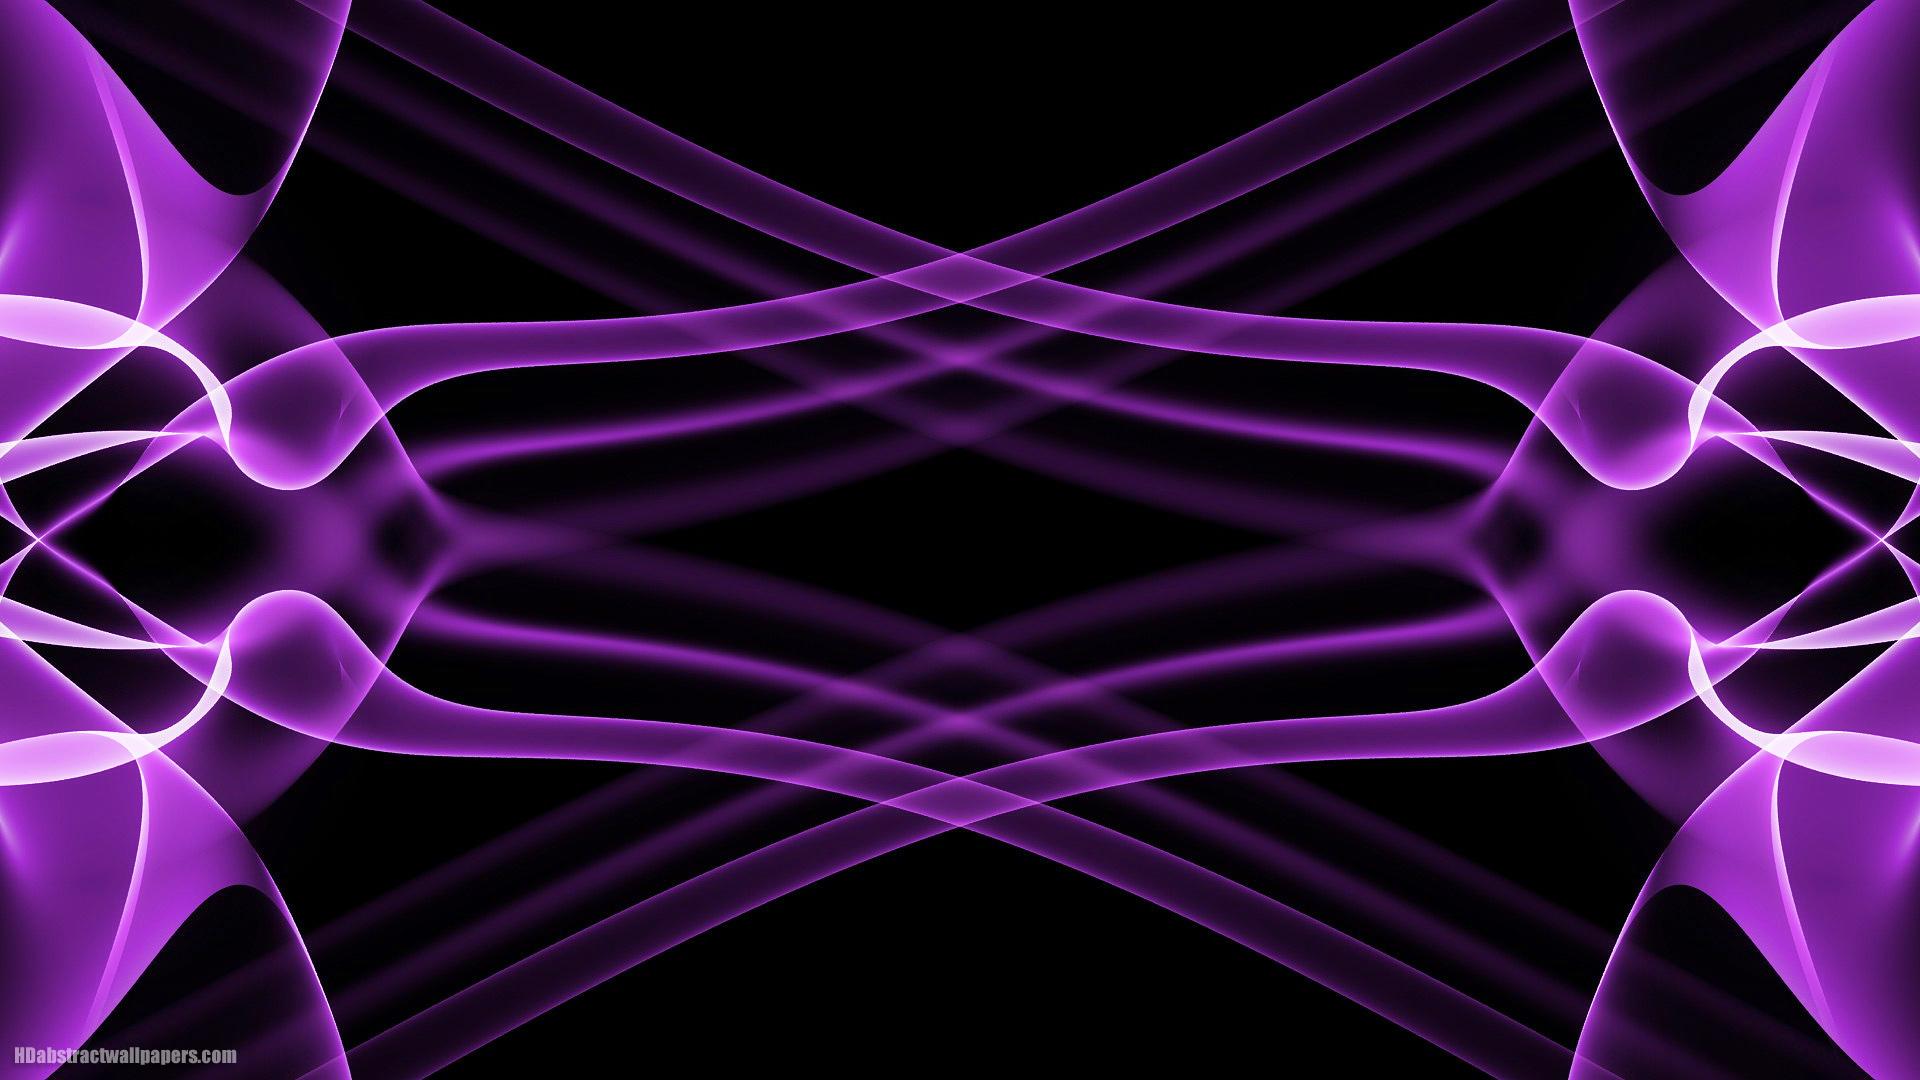 Wallpaper Purple and Black Abstract Painting, Background - Download Free  Image